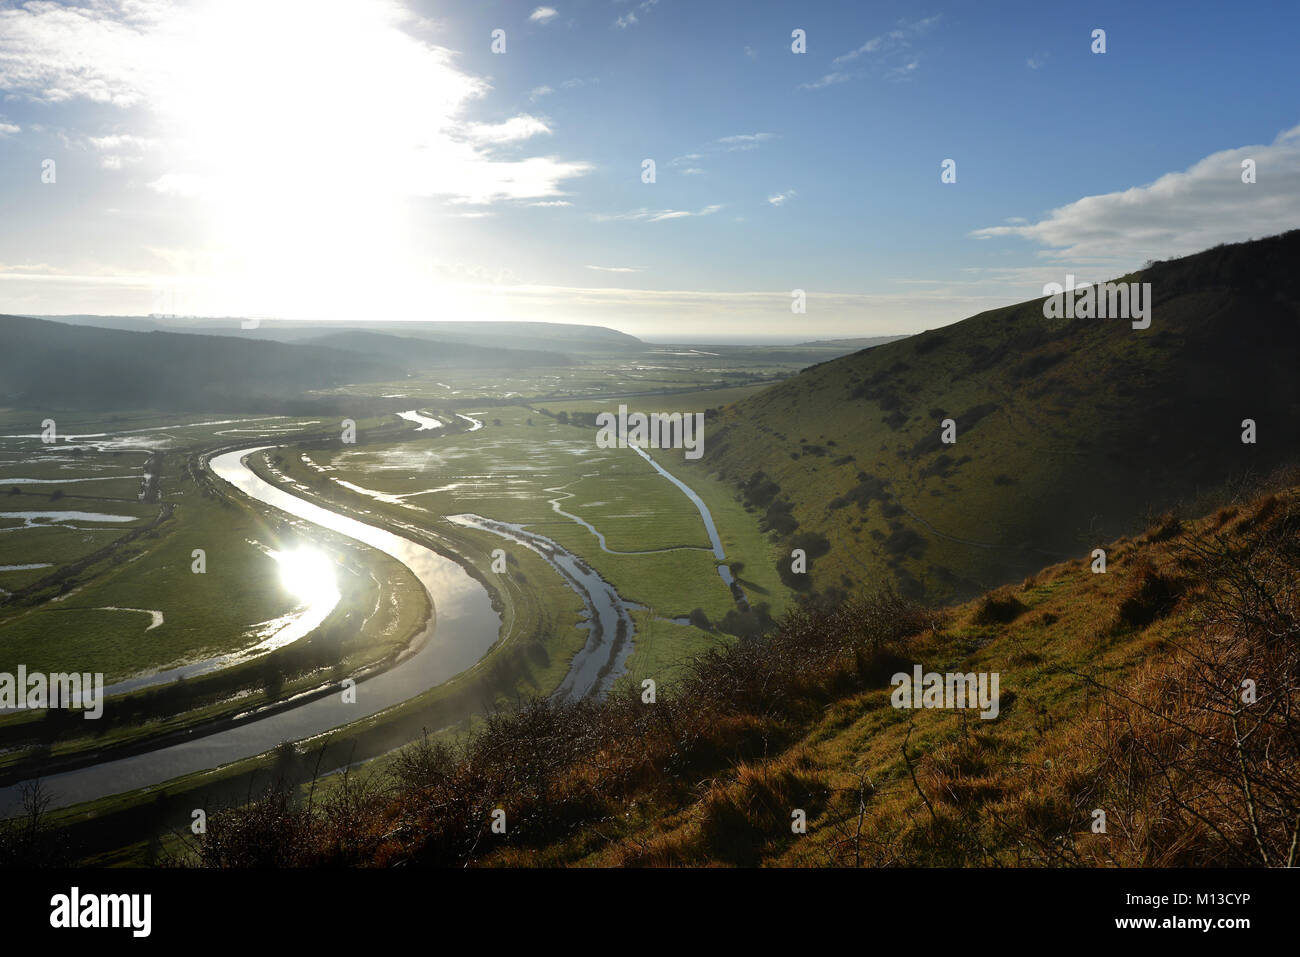 Seaford, UK. 26th January 2018. The sun shining on the river Cuckmere as it meanders through the South Downs National park near Seaford. Credit: Peter Cripps/Alamy Live News Stock Photo